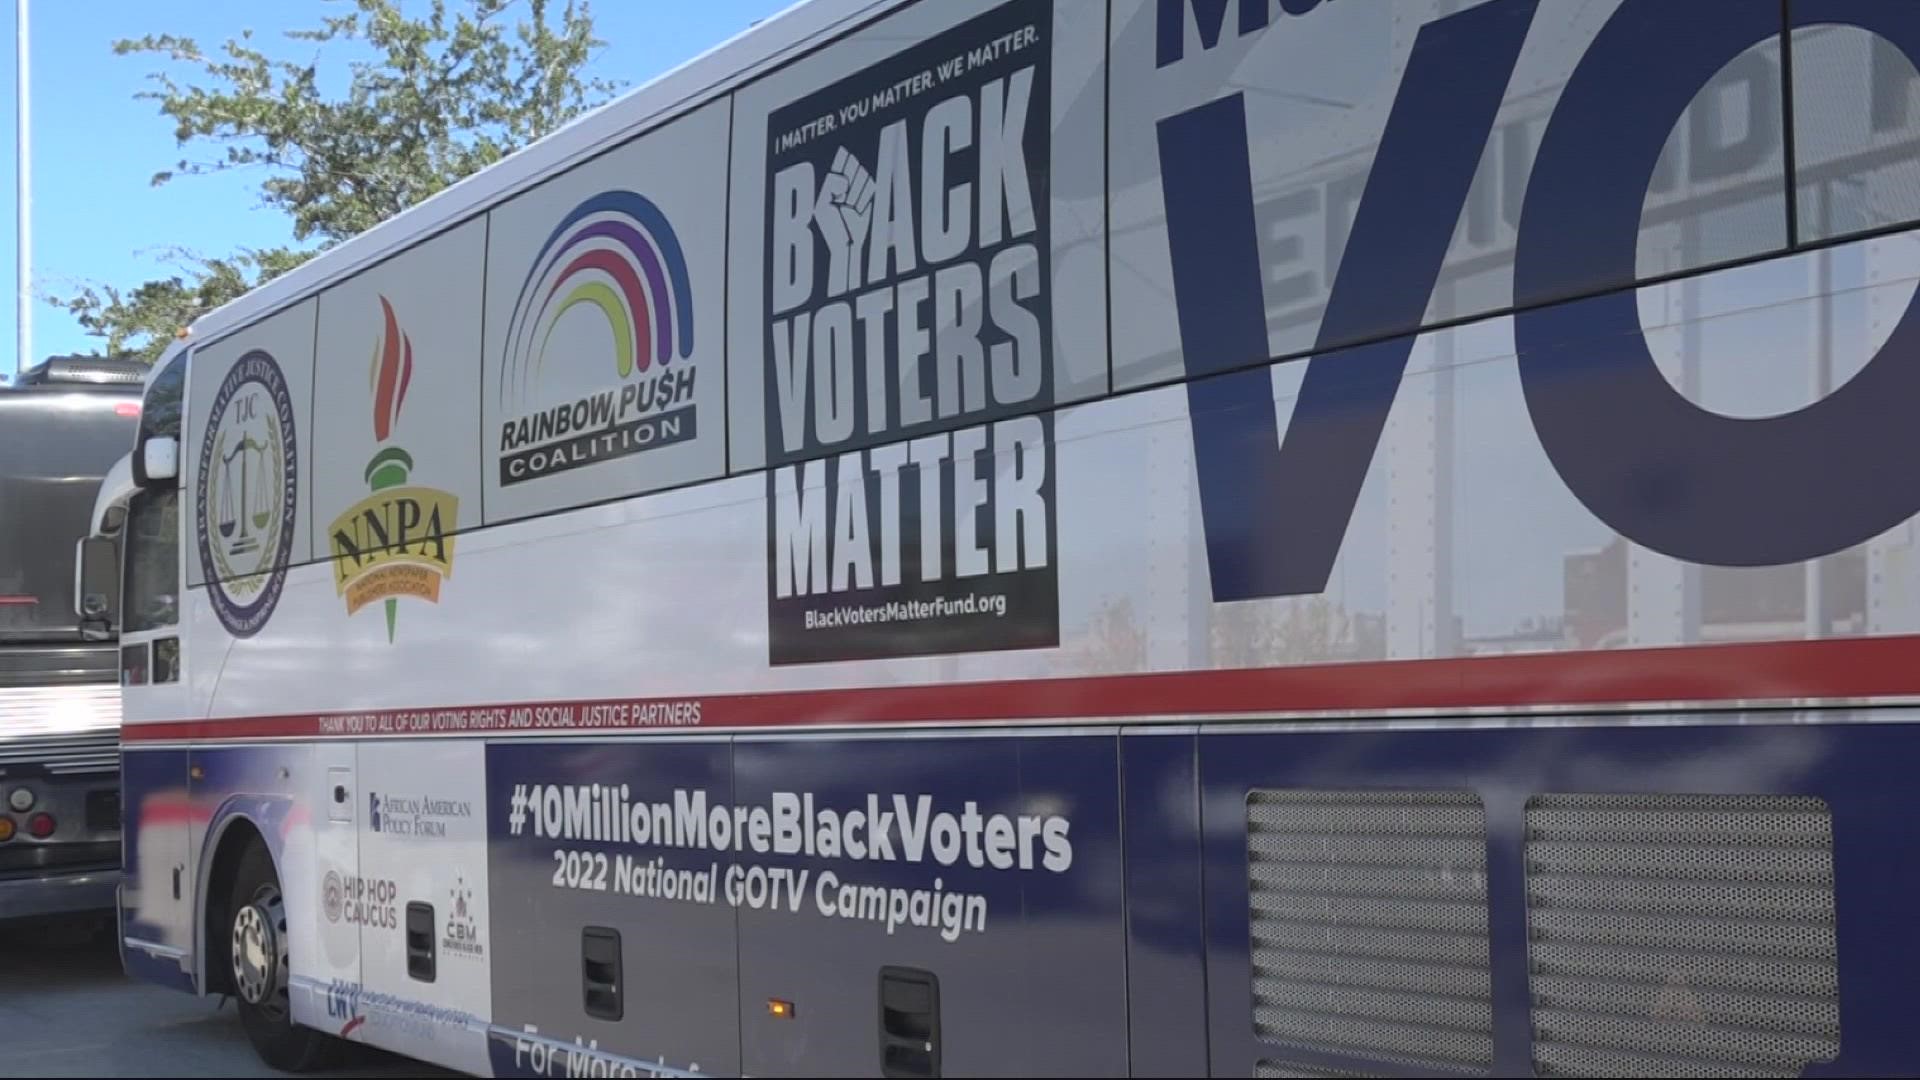 The aim of the tour is to "mobilize Black voters and engage with policymakers, faith-based leaders, Black influencers and HBCU students leading up to the election.